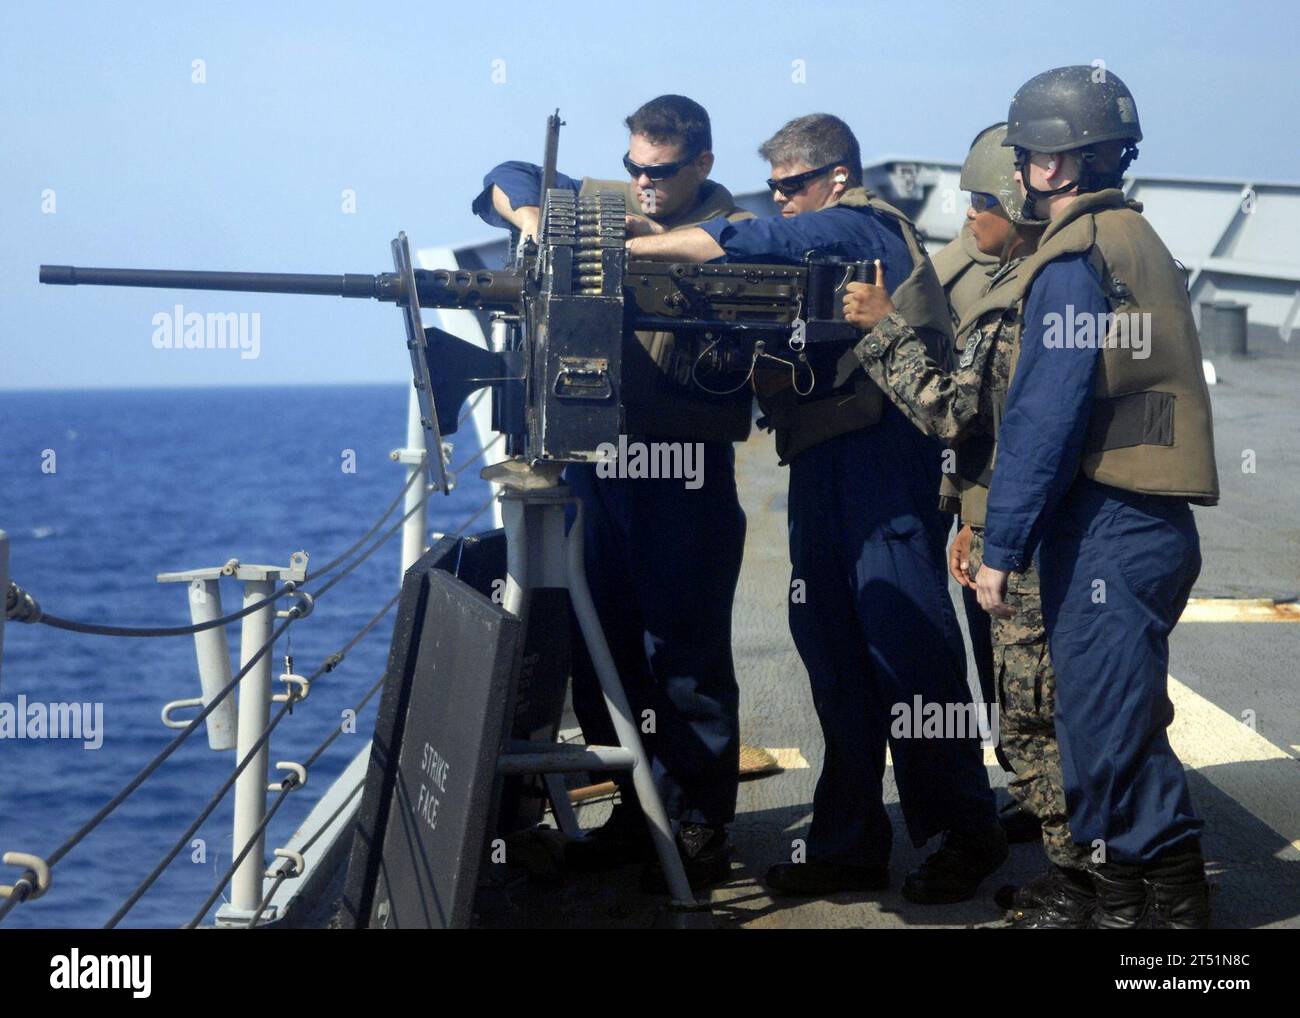 0905254879G-491 ATLANTIC OCEAN (May 25, 2009) A Honduran Infanteria De Marine waits as U.S. Navy Sailors clear a jam in a .50 caliber machine gun during a multi-national gunnery exercise aboard the guided-missile frigate USS Doyle (FFG 39). The Honduran marines were aboard Doyle for a Southern Seas 2009 multi-national damage control and weapons training exercise. Navy Stock Photo